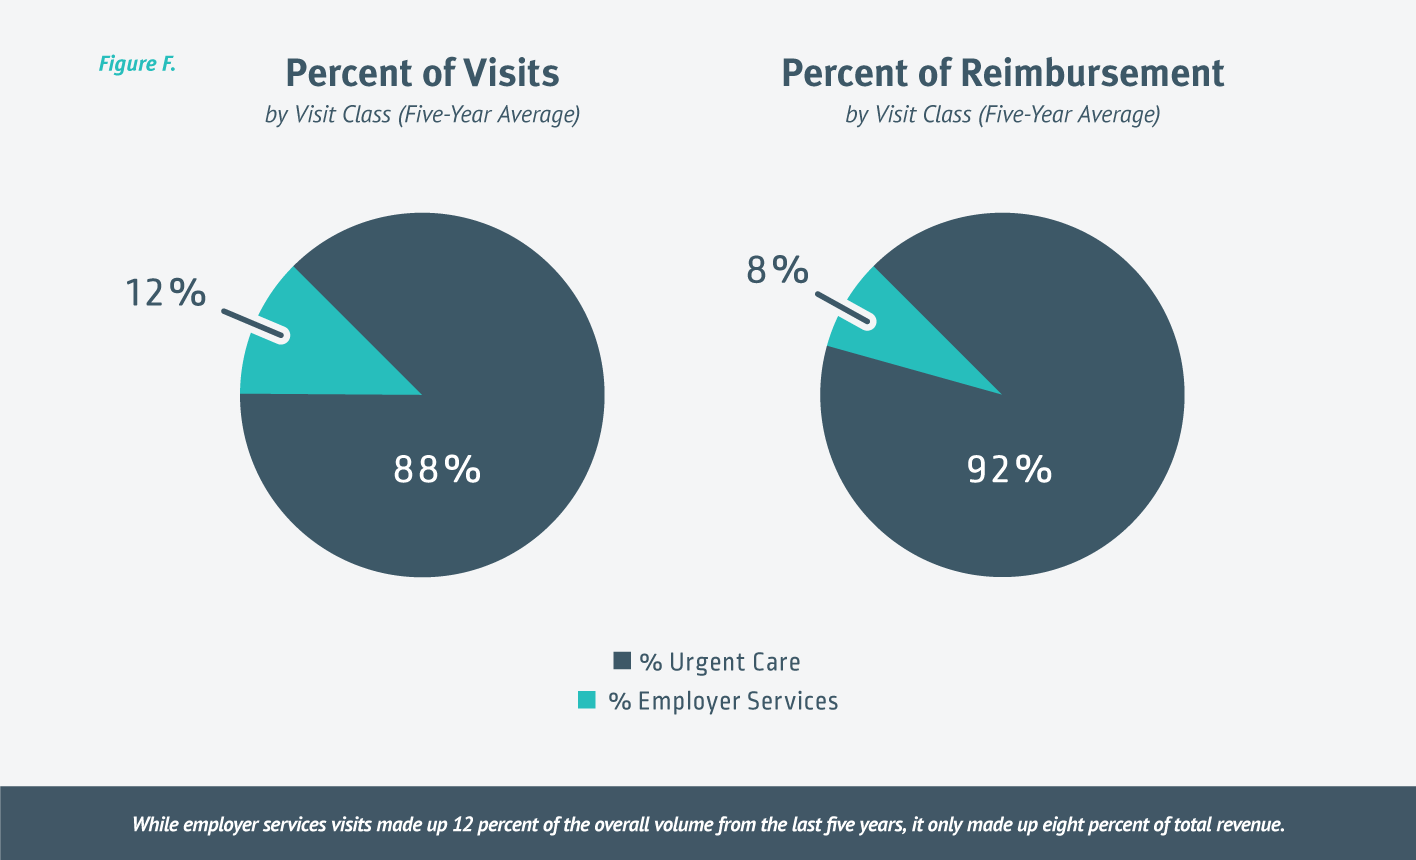 chart showing 5-year average percent of urgent care visits by visit class and percent of reimbursement by visit class